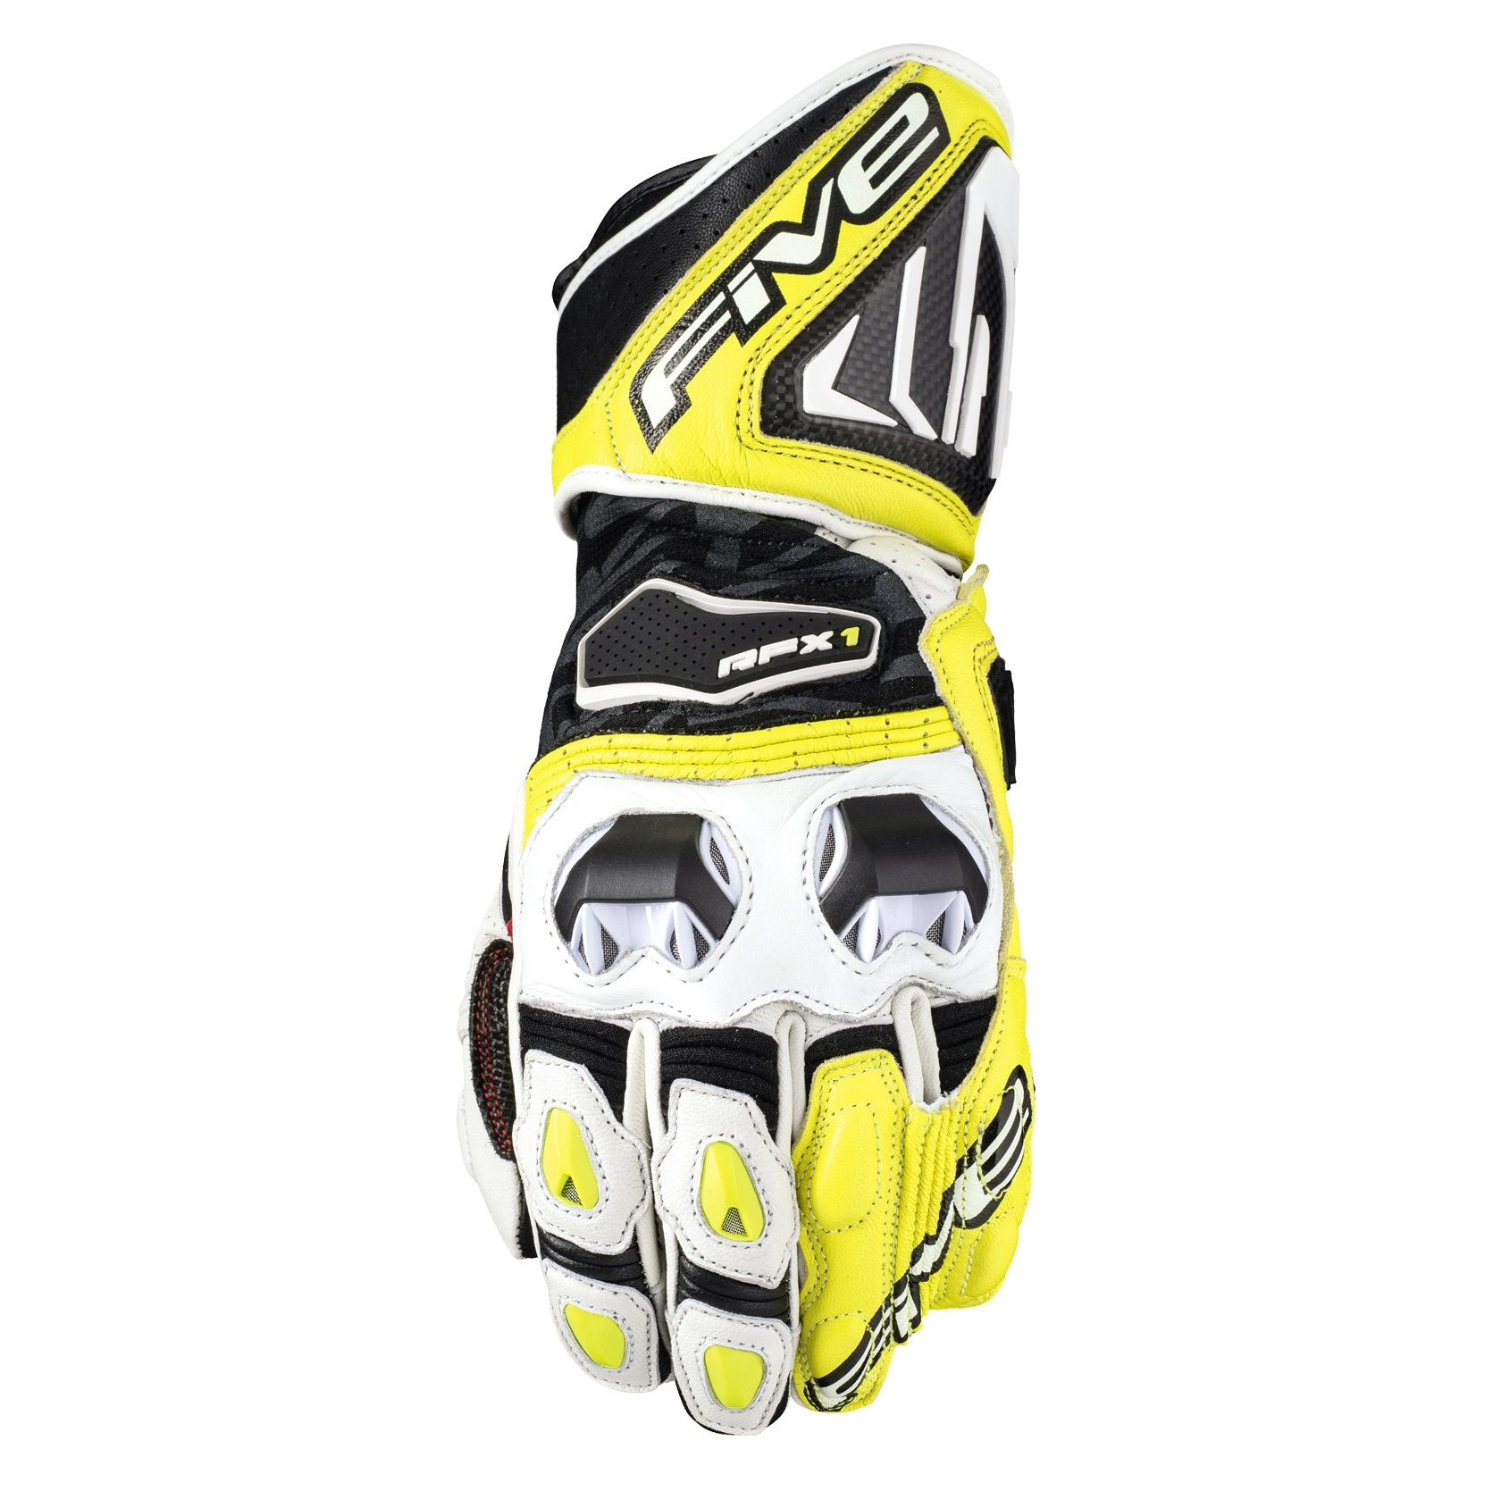 Image of EU Five RFX1 Gloves White Yellow Taille 2XL